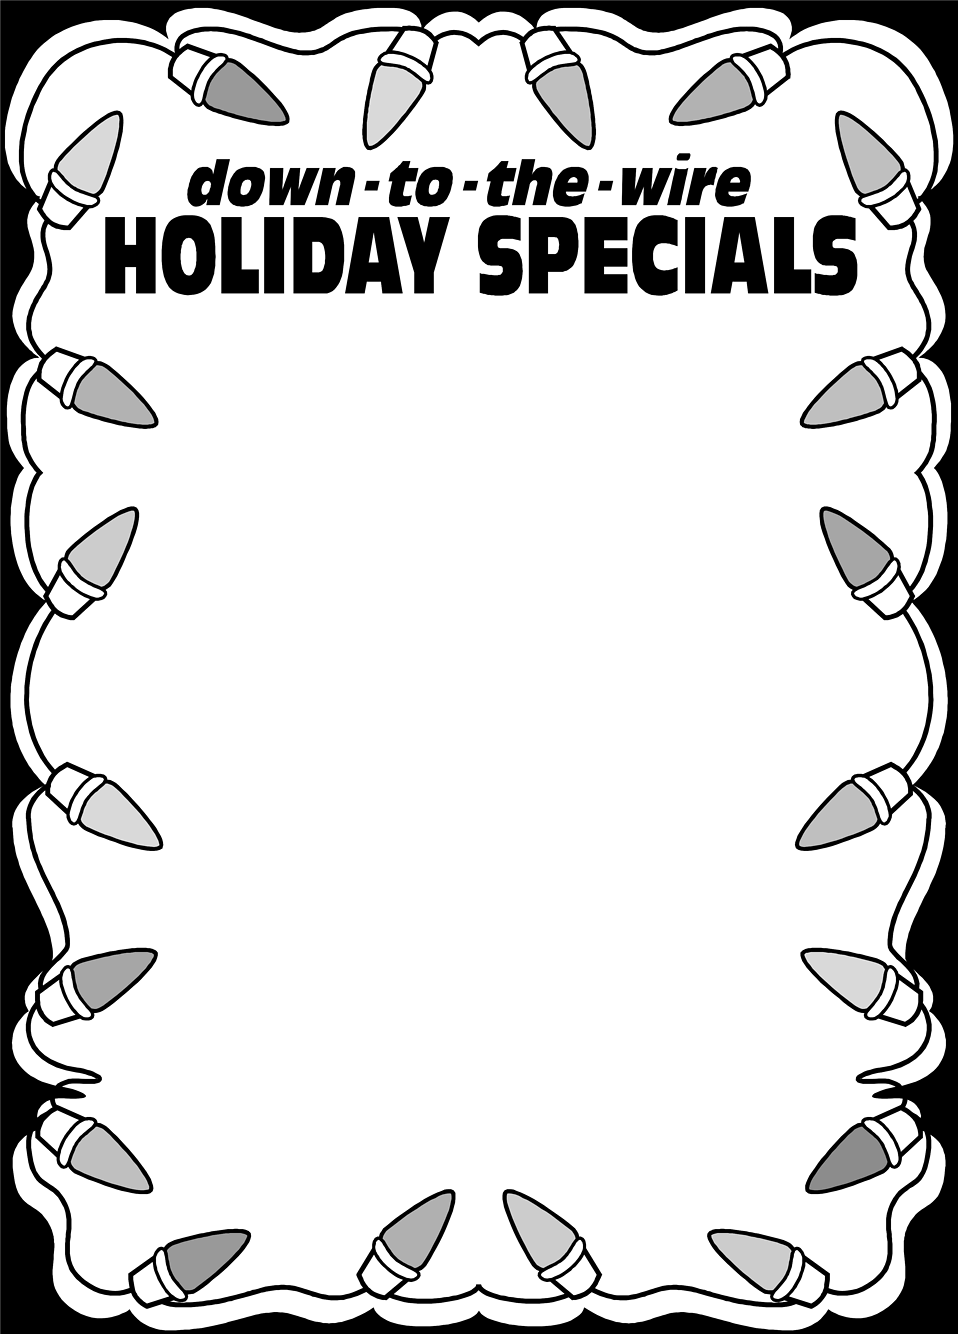 Free Christmas Clip Art Borders Black And White - www.proteckmachinery ...